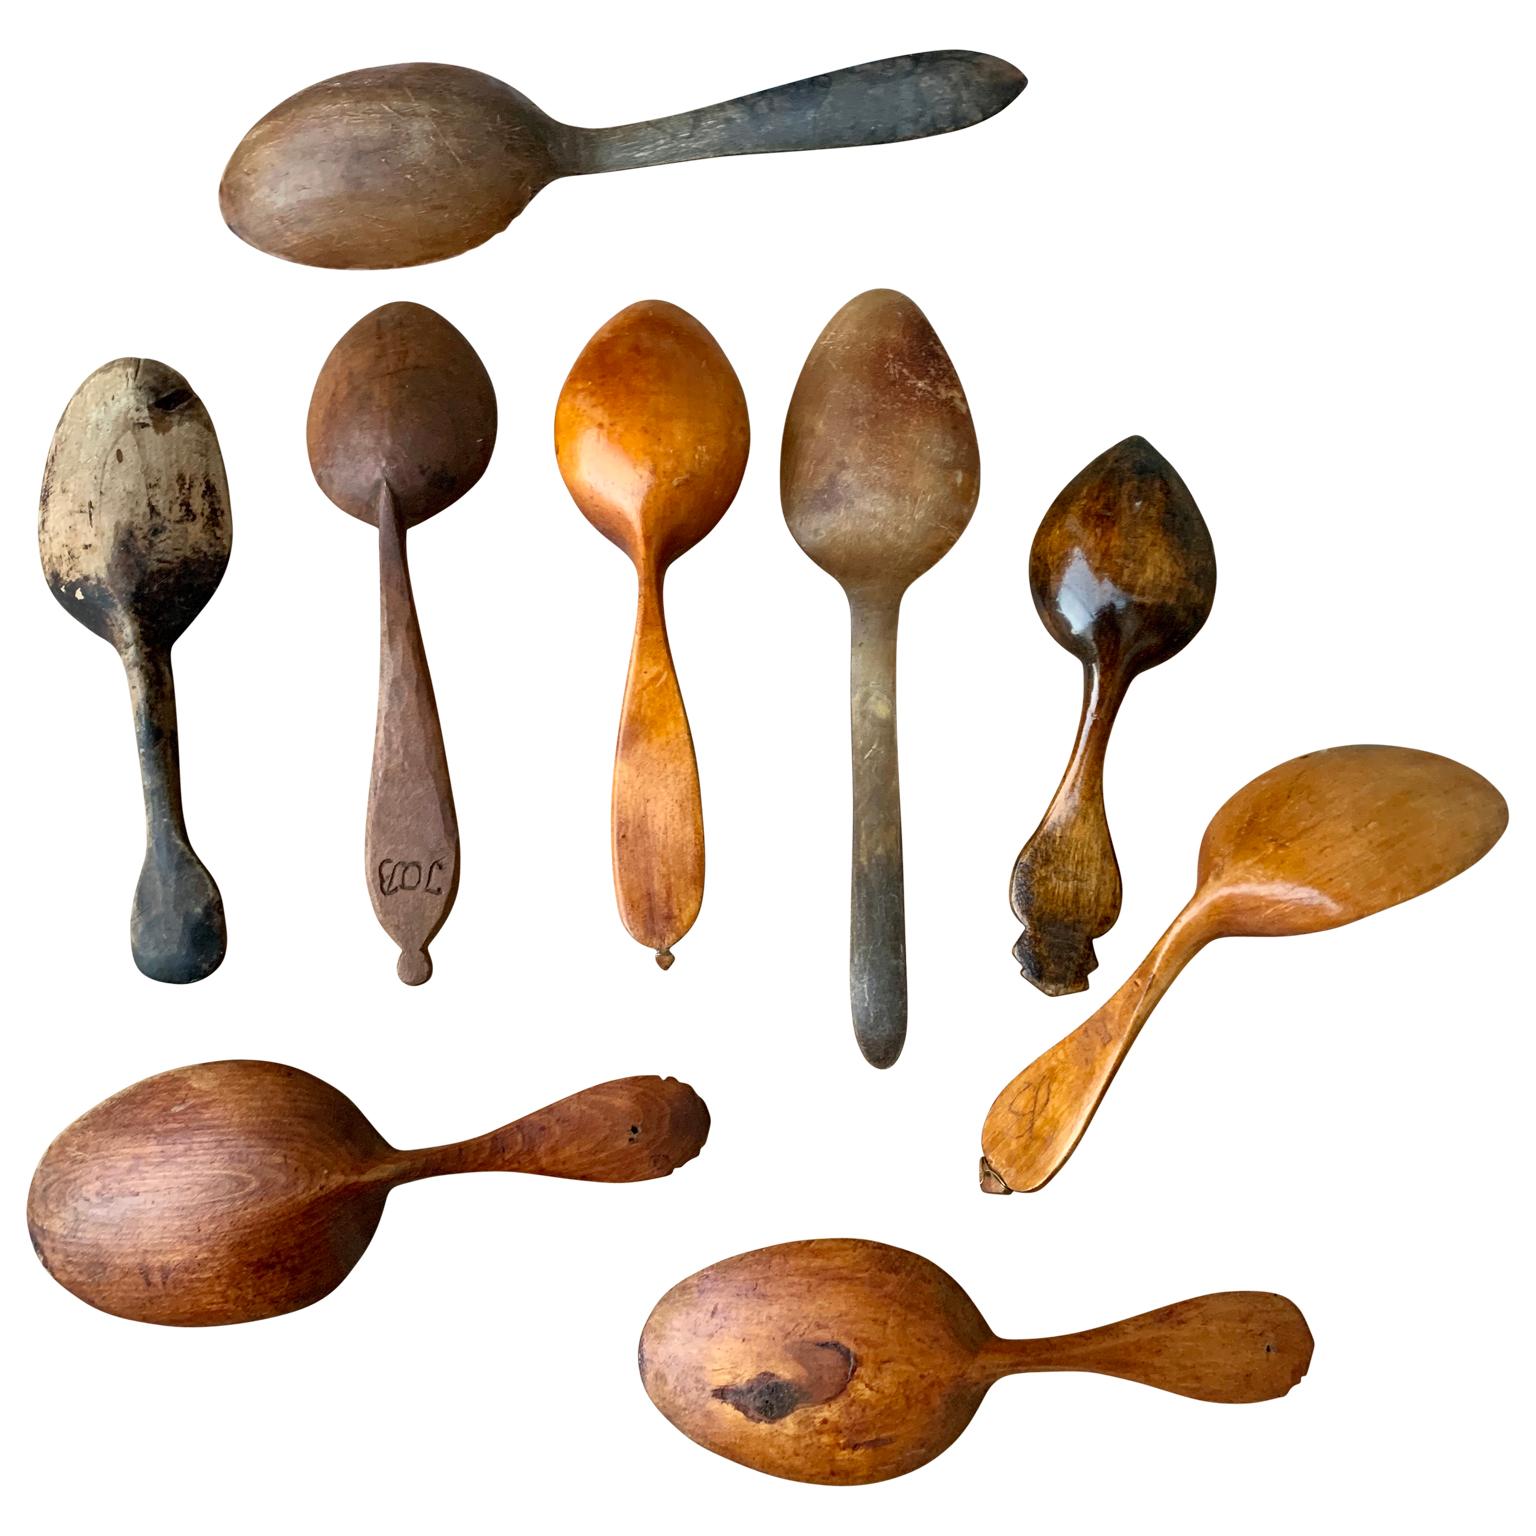 A set of 9 Swedish hand carved spoons from 19th century. In both cow horn and wood, some painted and dated.